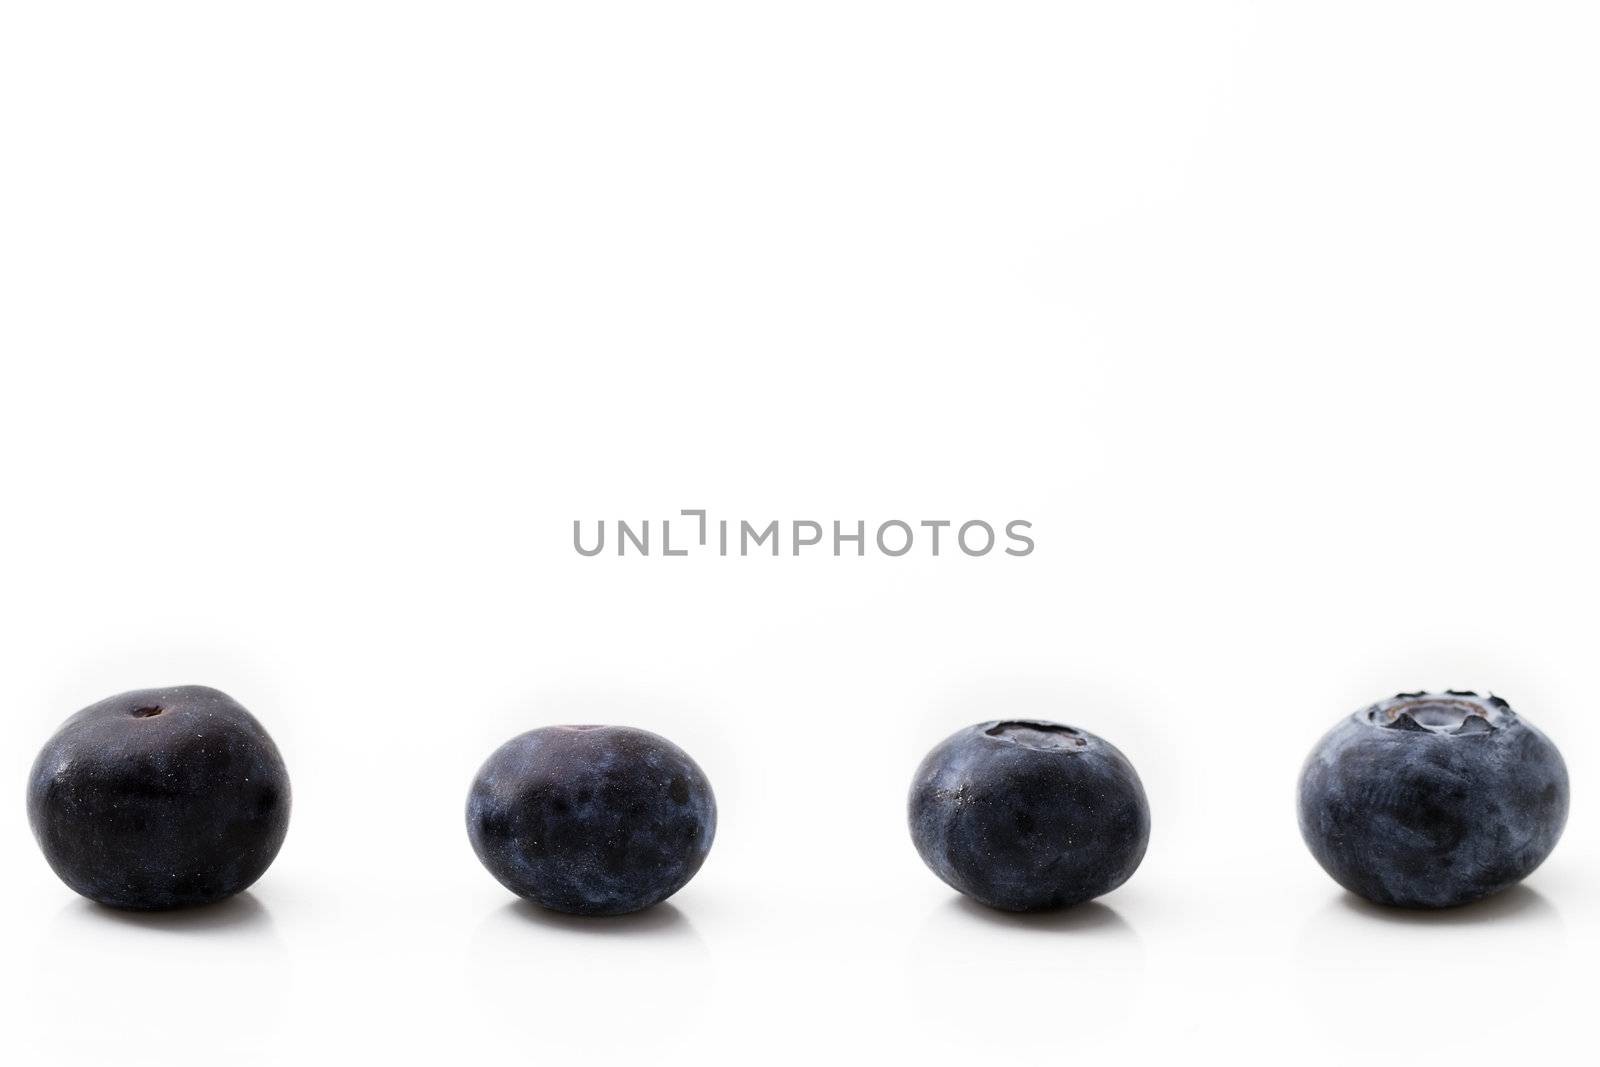 four blueberries in a row isolated on white background